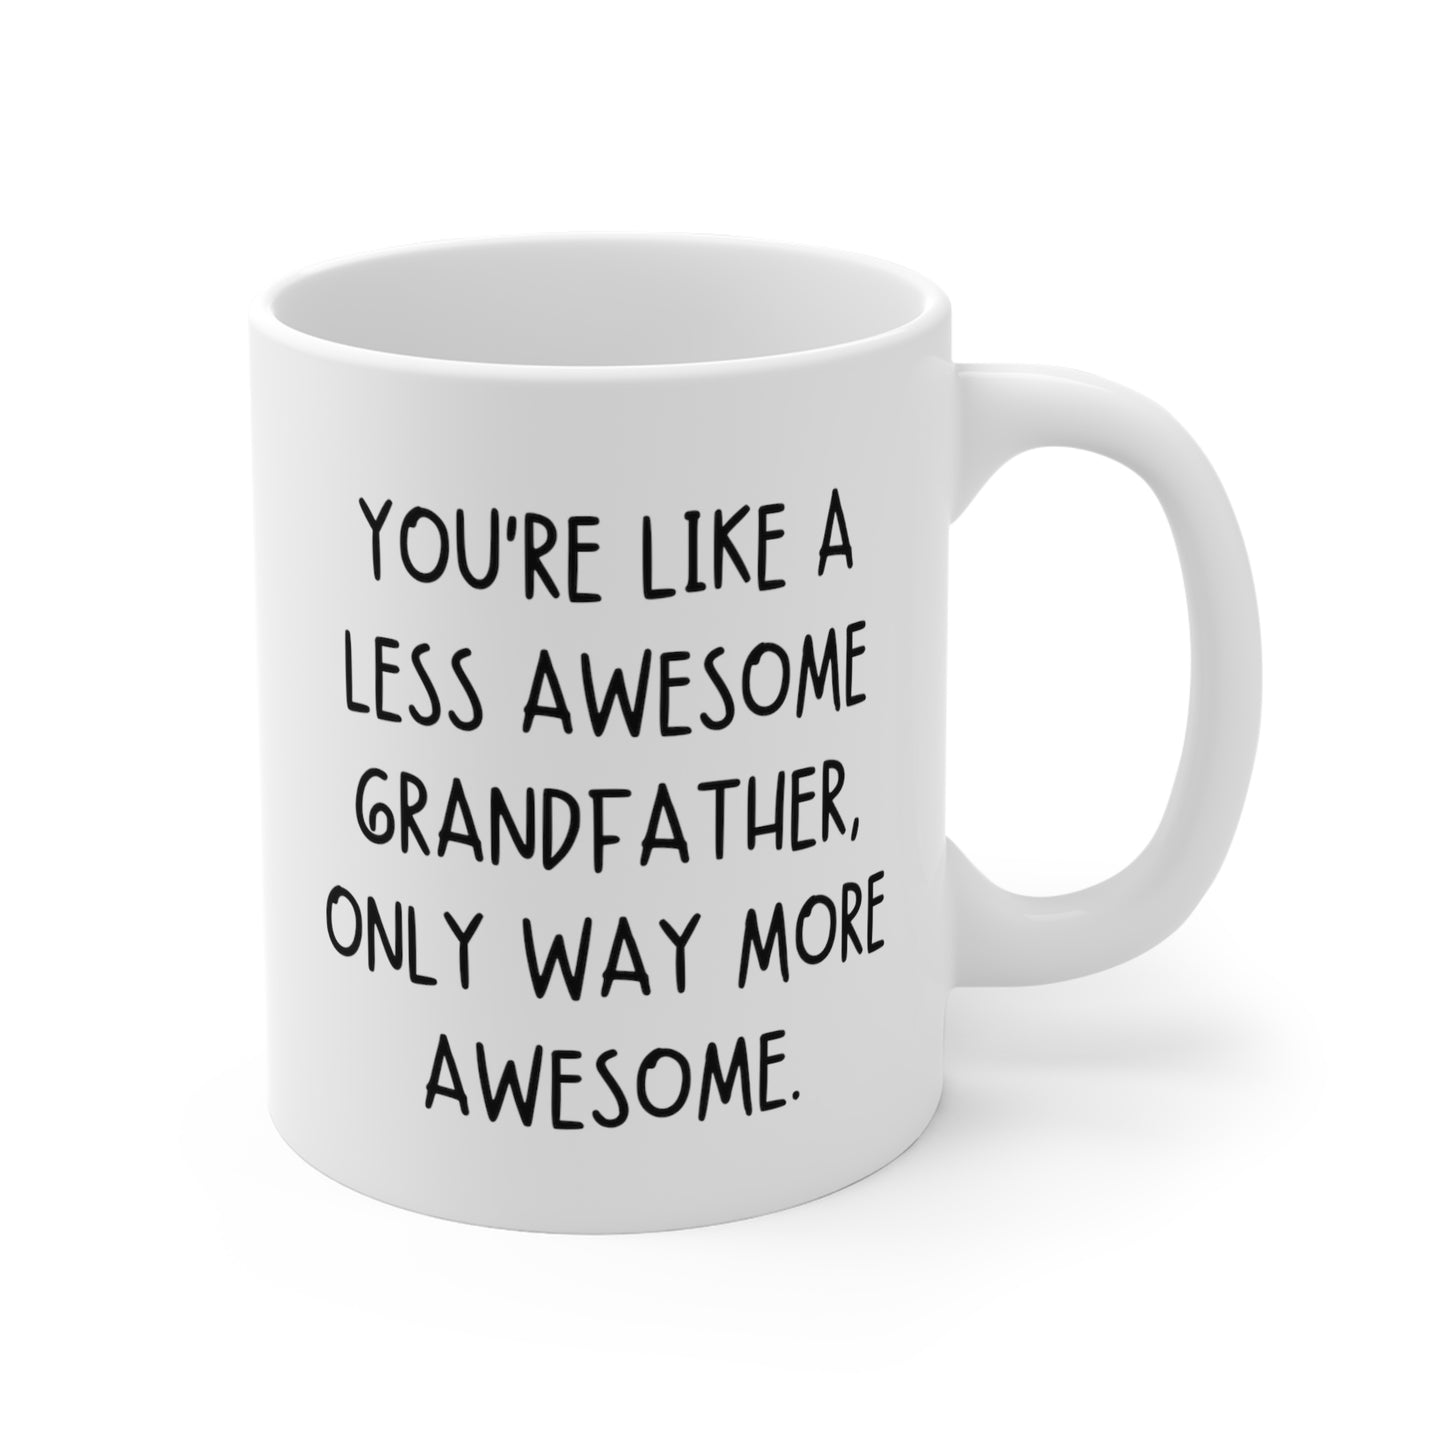 You're Like A Less Awesome Grandfather, Only Way More Awesome | Funny, Snarky Gift | White Ceramic Mug, Handwritten Block Font